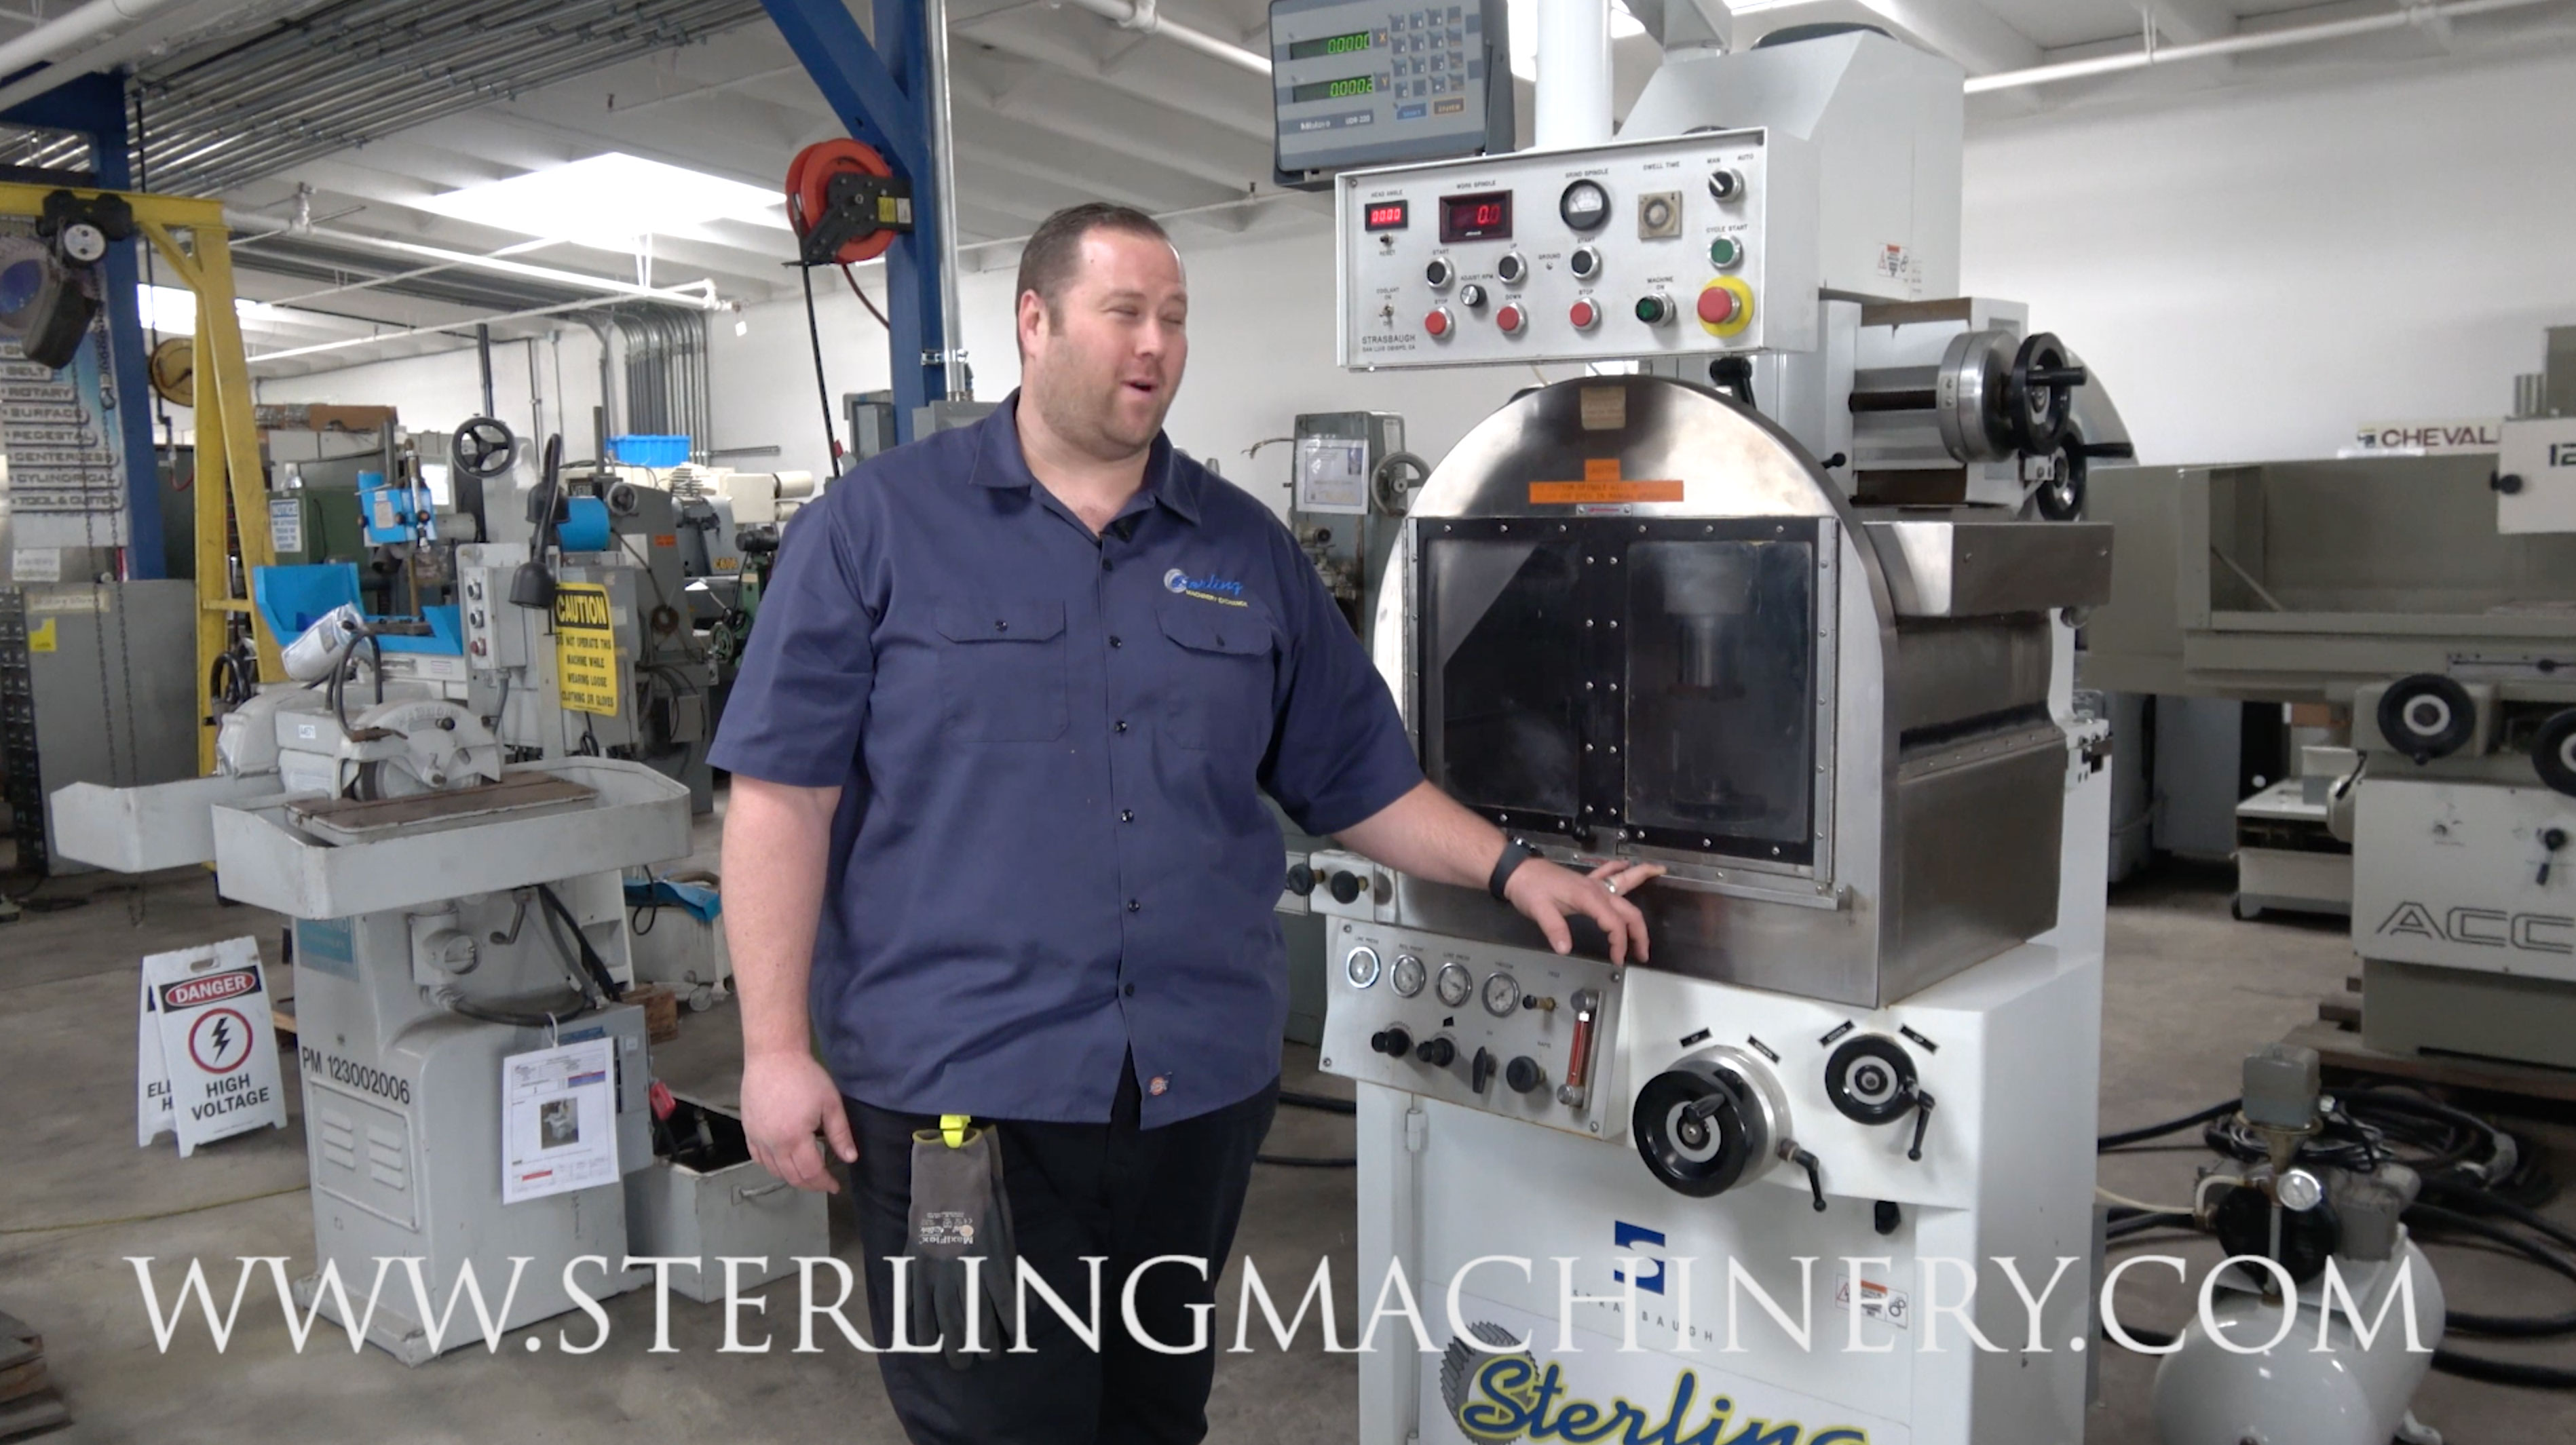 Strasbaugh-18" Used Strasbaugh Glass Grinder/Production Generator, Mdl. 7X, Strasbaugh Proprietary Pneumo-Hydraulic Spindle Feed System, Variable Speed Lower Spindle Drive, Digital Spindle Height Indicator, Stainless Steel Grinding Chamber, Stainless Steel Coolant S-01